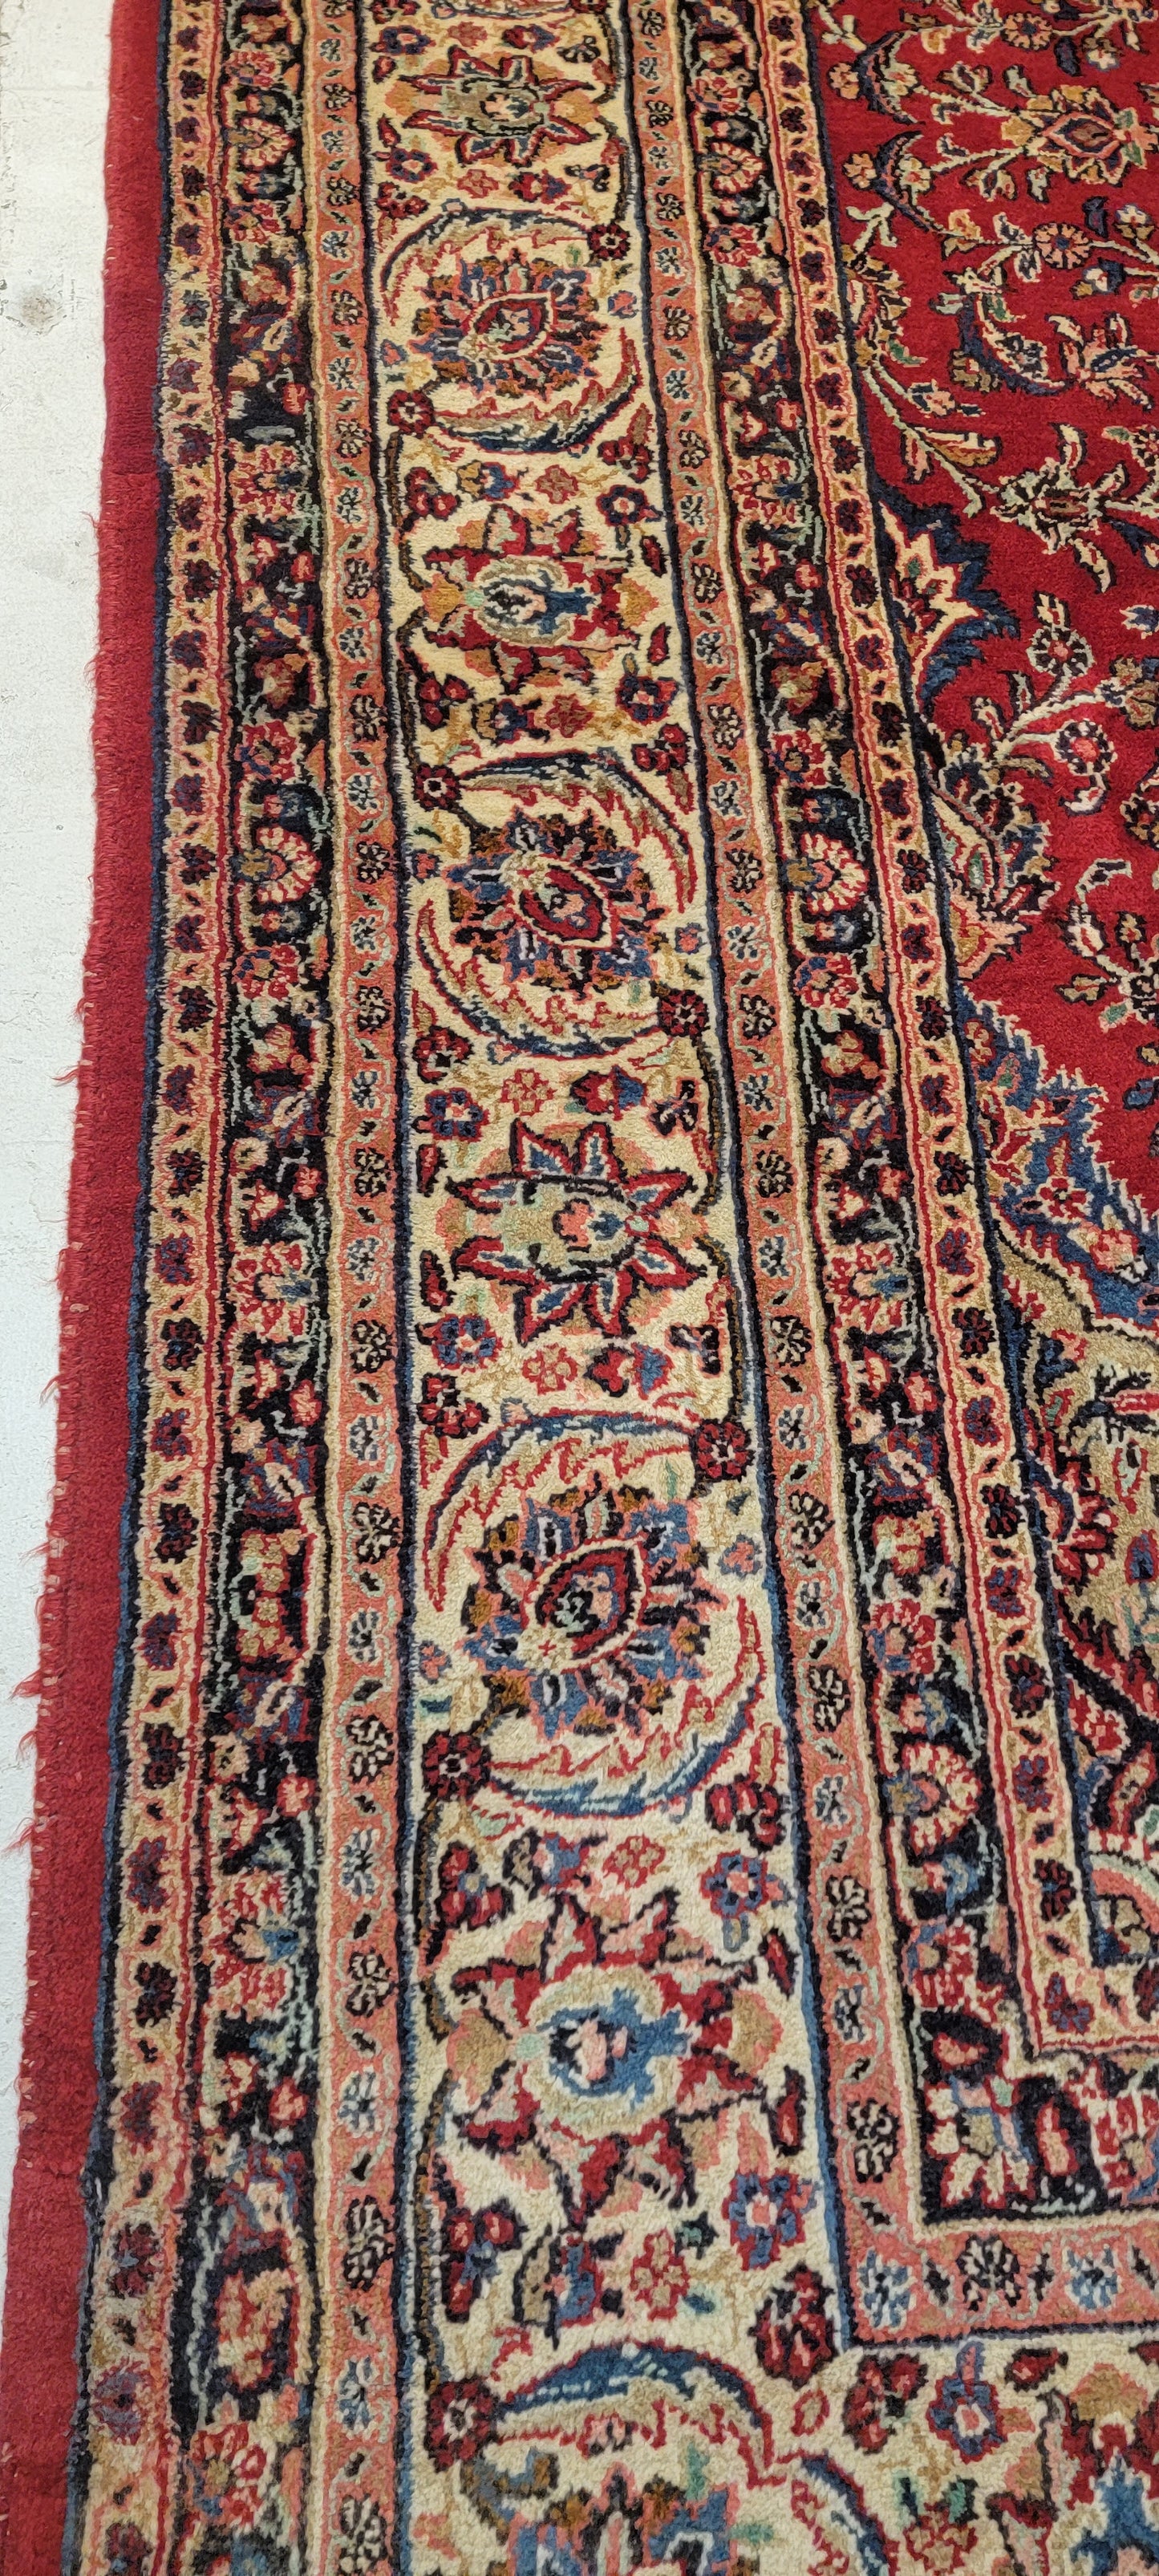 Hand-Knotted Wool Rug Qazvin 9'5" x 13'